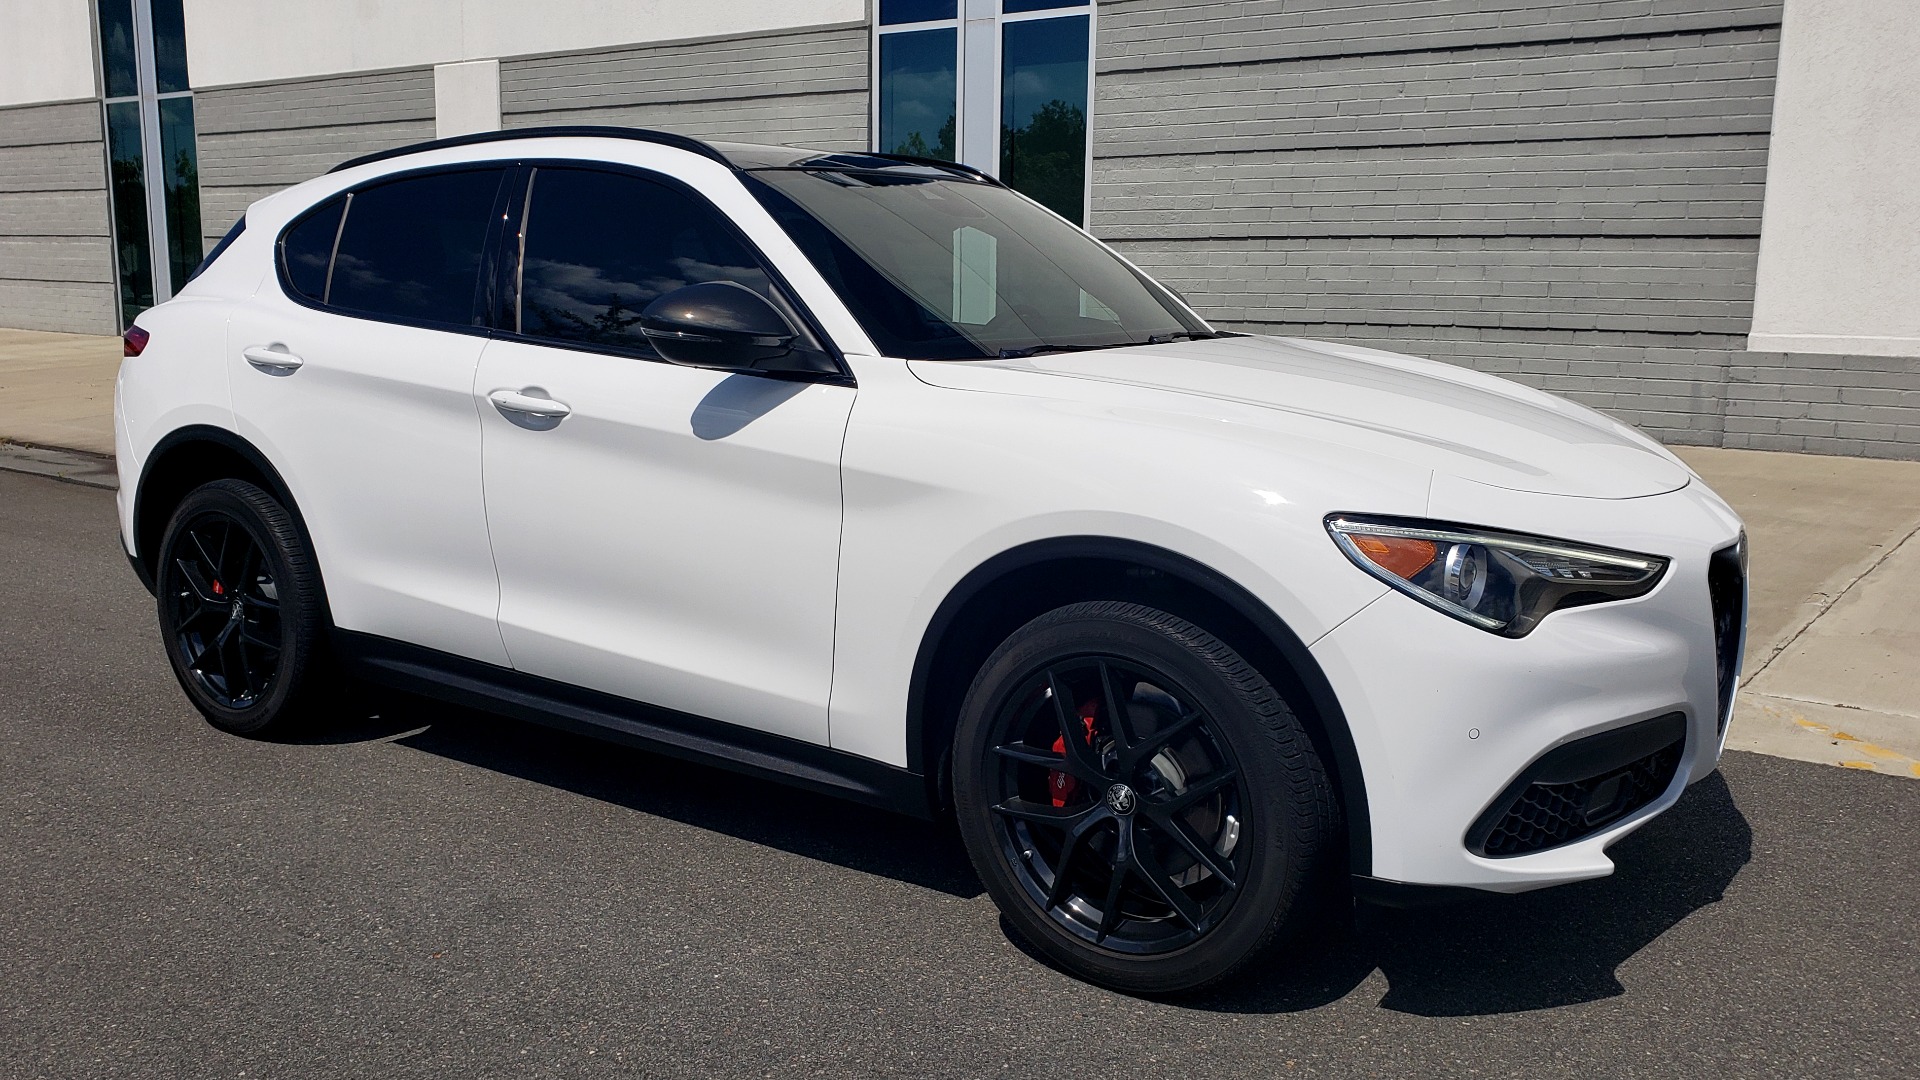 Used 2019 Alfa Romeo STELVIO TI SPORT AWD / 2.0L TURBO / 8-SPD AUTO / DRVR ASST / REARVIEW for sale Sold at Formula Imports in Charlotte NC 28227 11